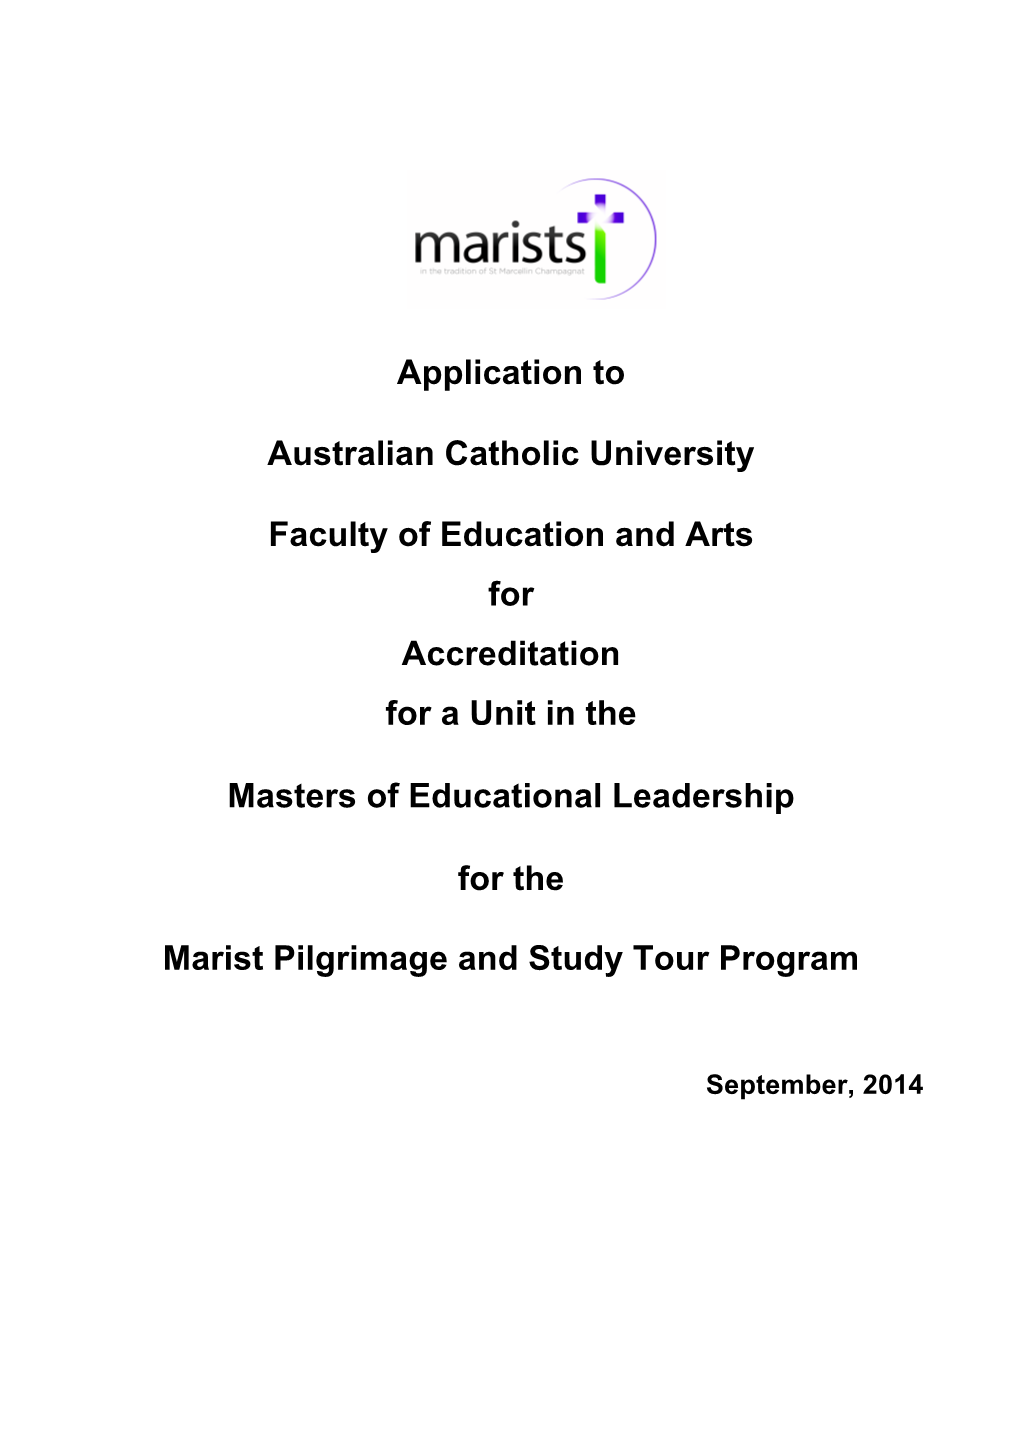 Application to Australian Catholic University Faculty of Education and Arts for Accreditation for a Unit in the Masters of Educ